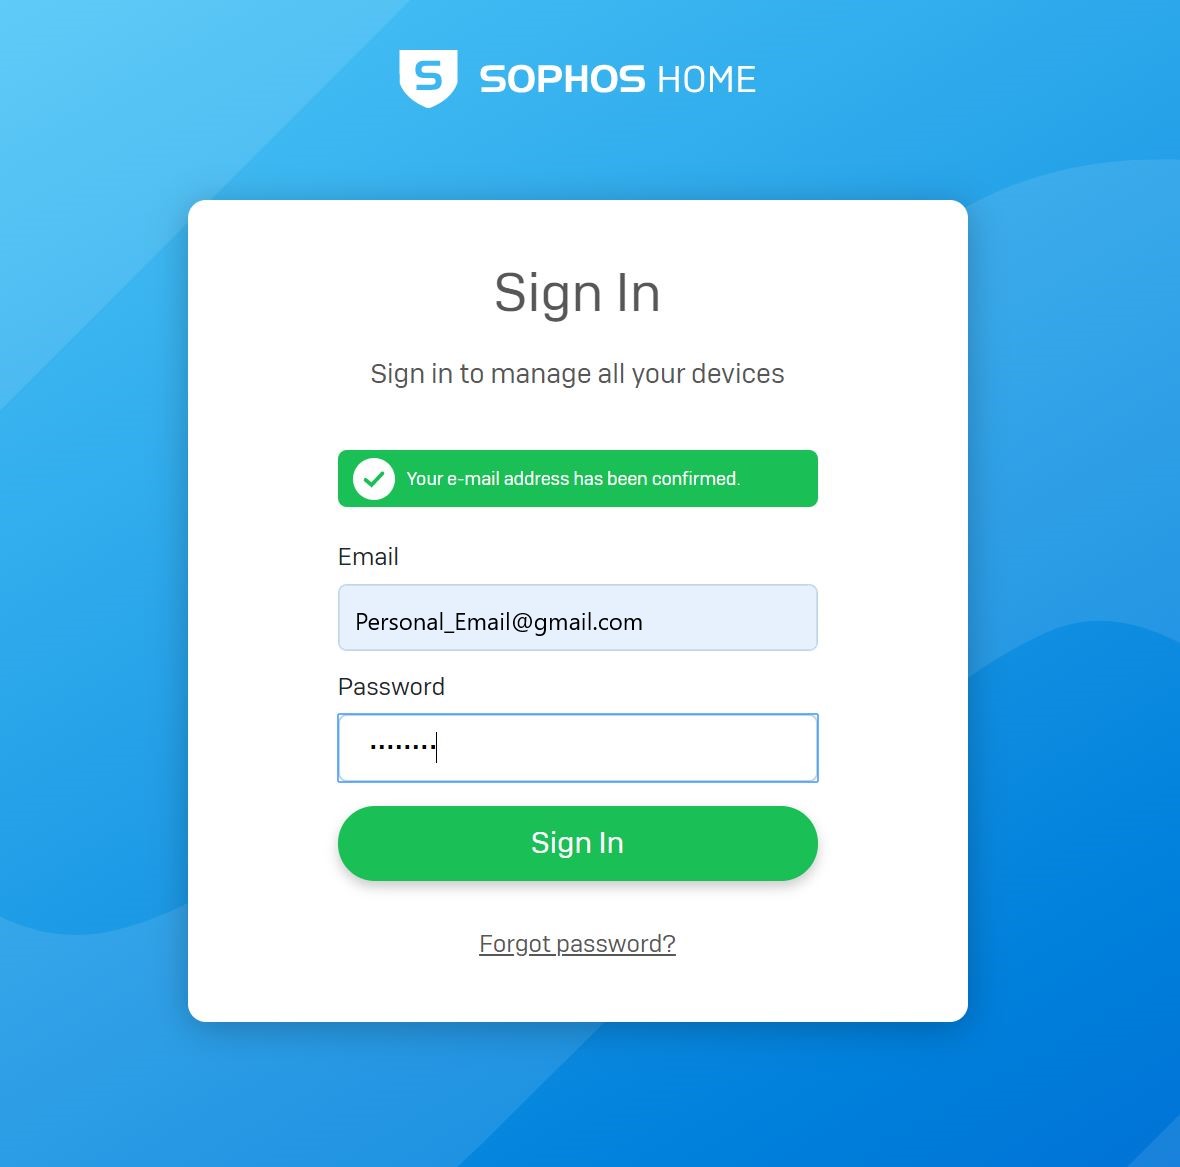 Login to Sophos using your credentials